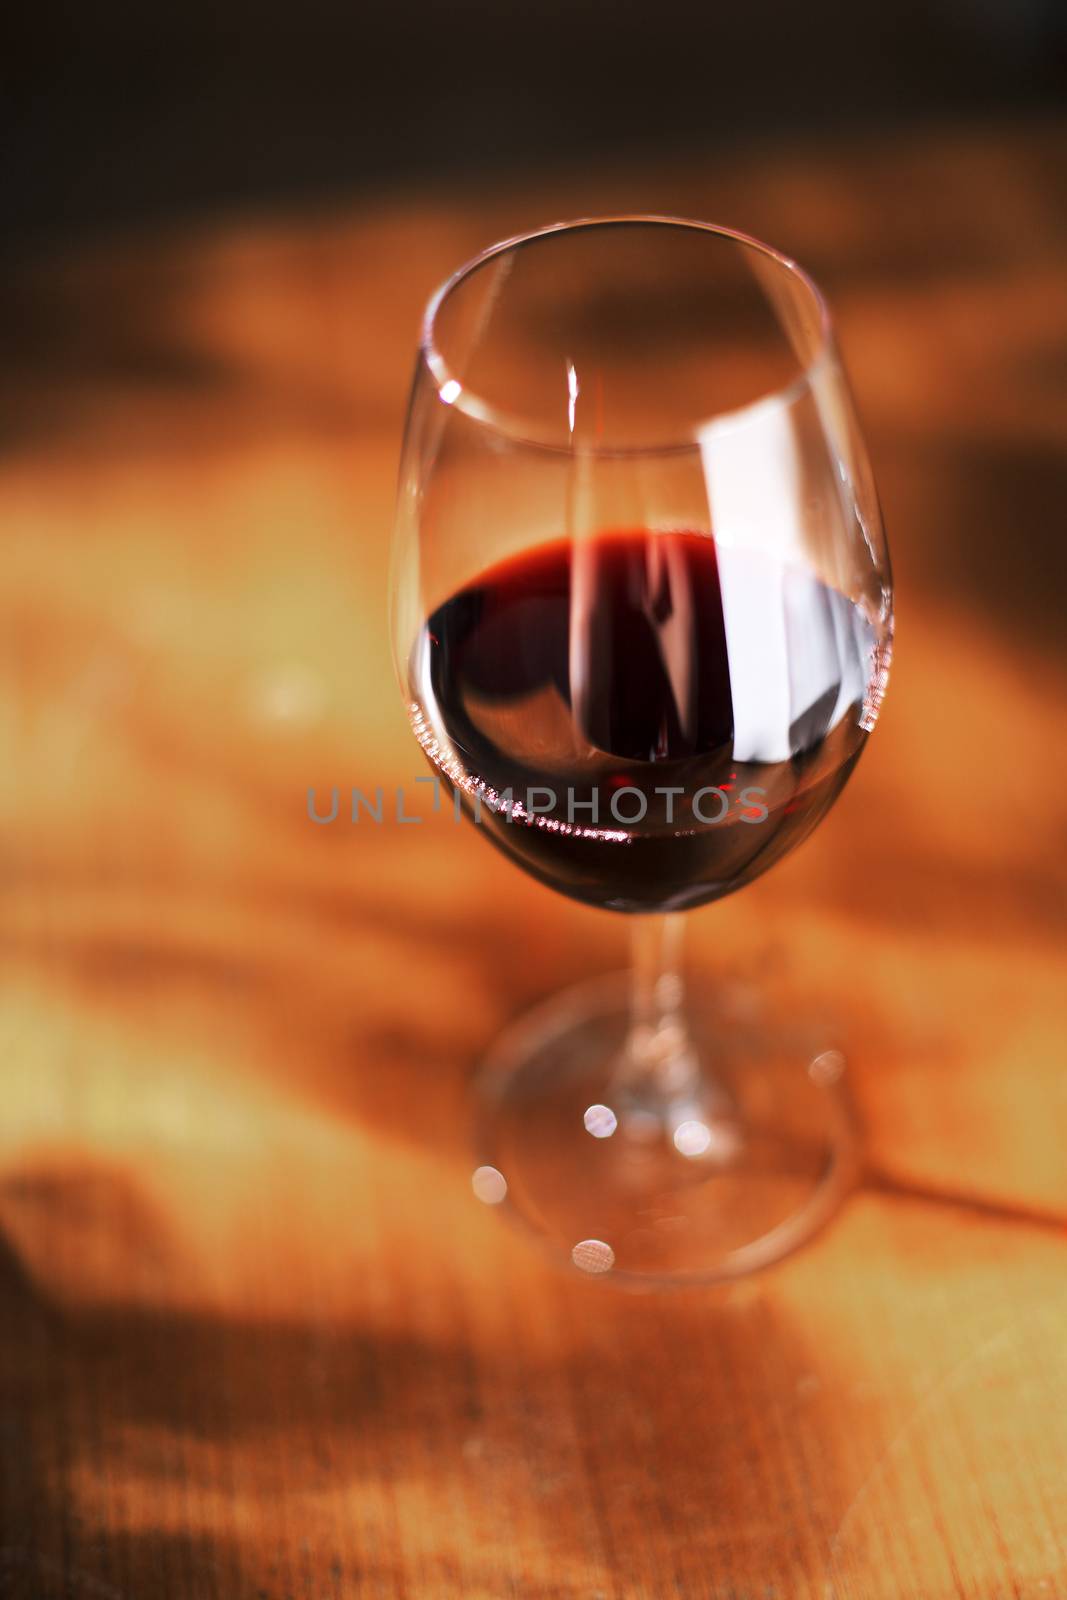 Glass of red wine on old wooden table. Very short depth of field.